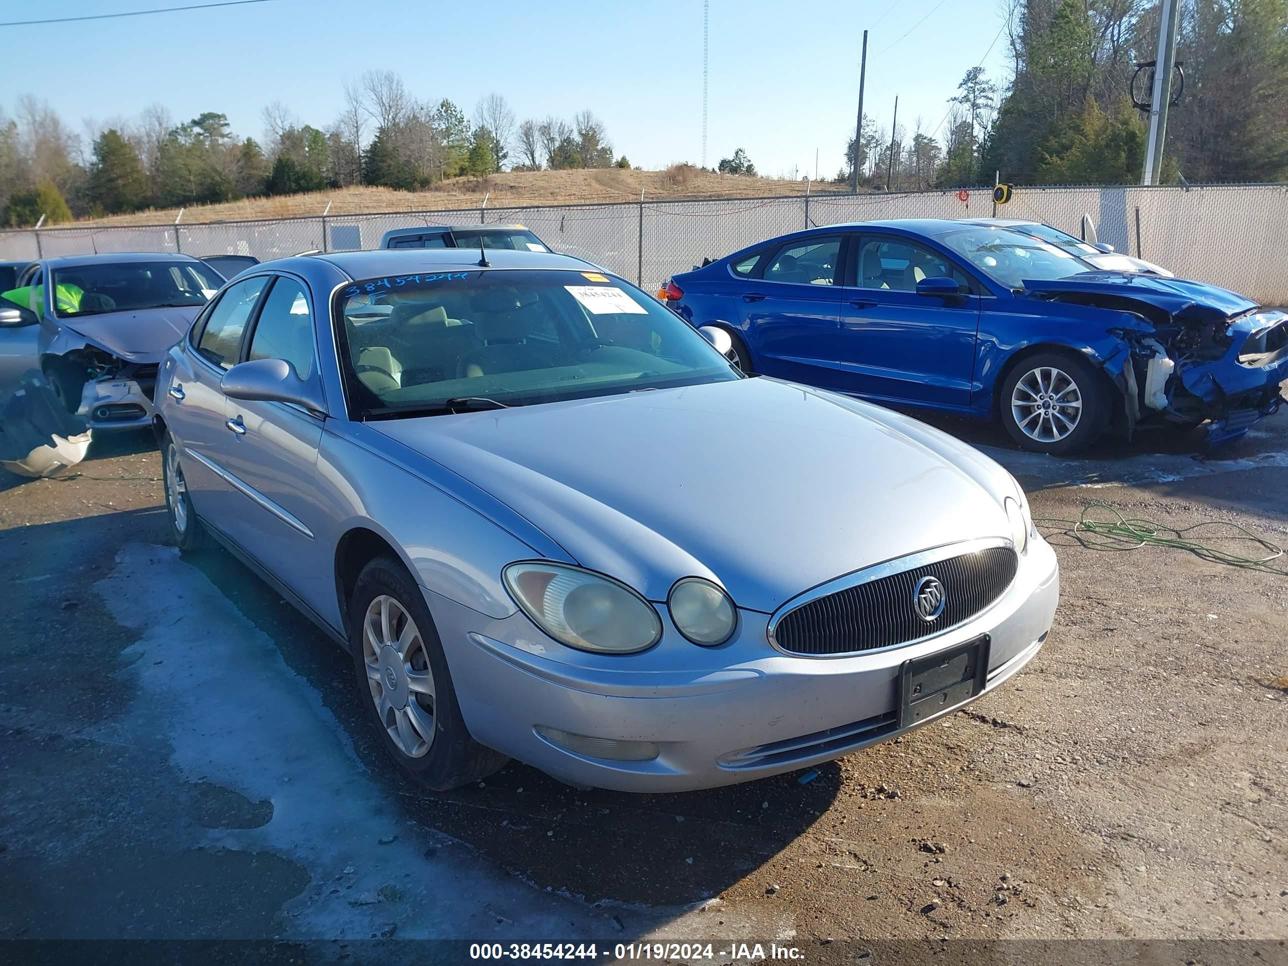 2G4WC532951346793  - BUICK LACROSSE  2005 IMG - 0